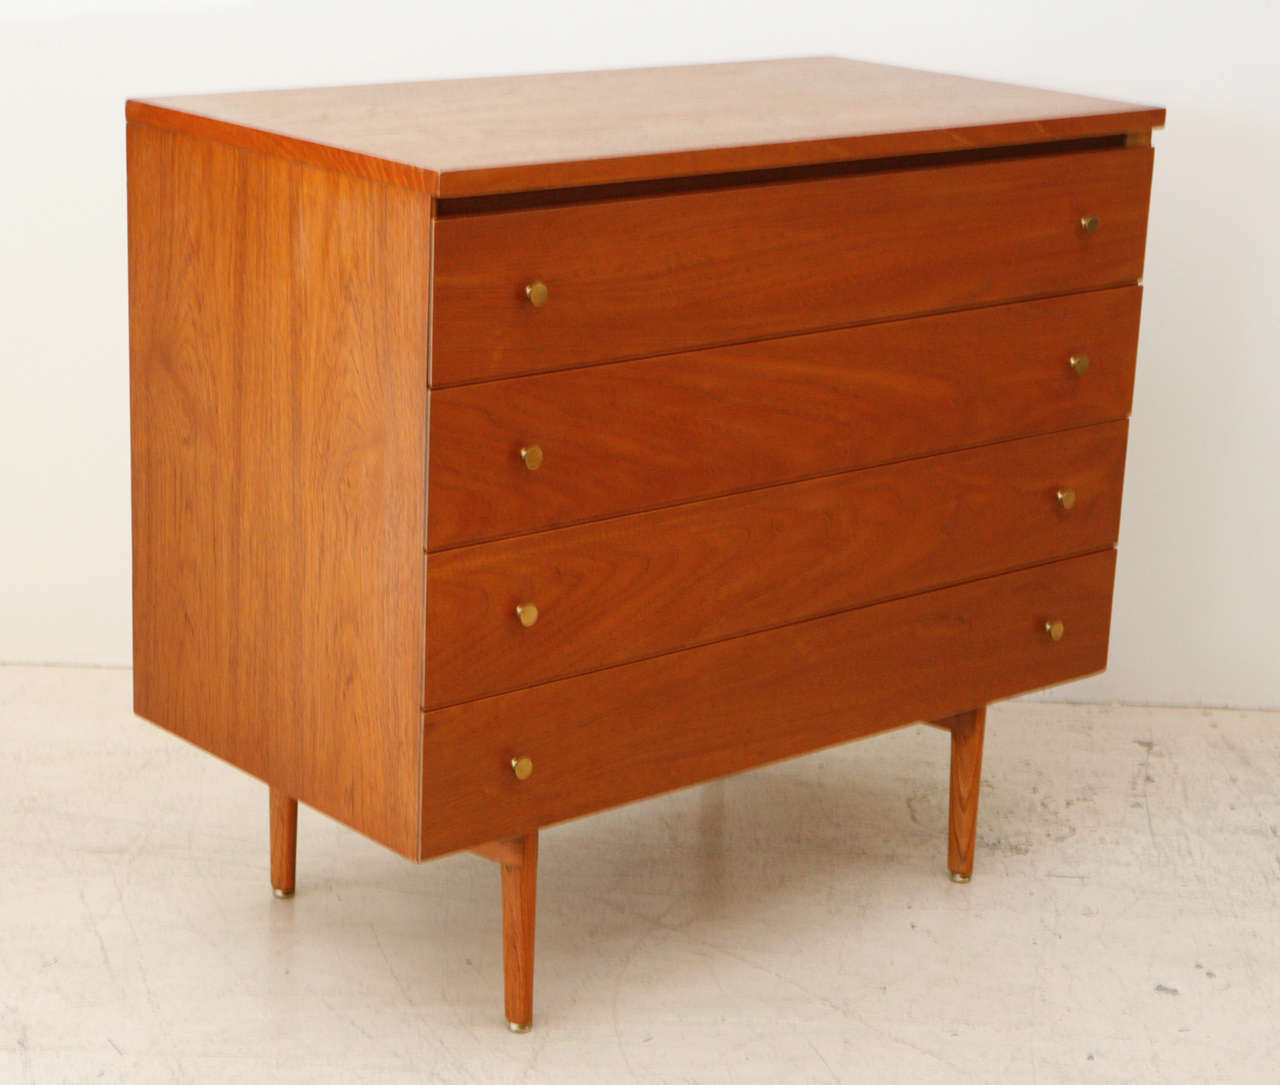 Walnut chest by Paul McCobb for Calvin with rare base and hardware.